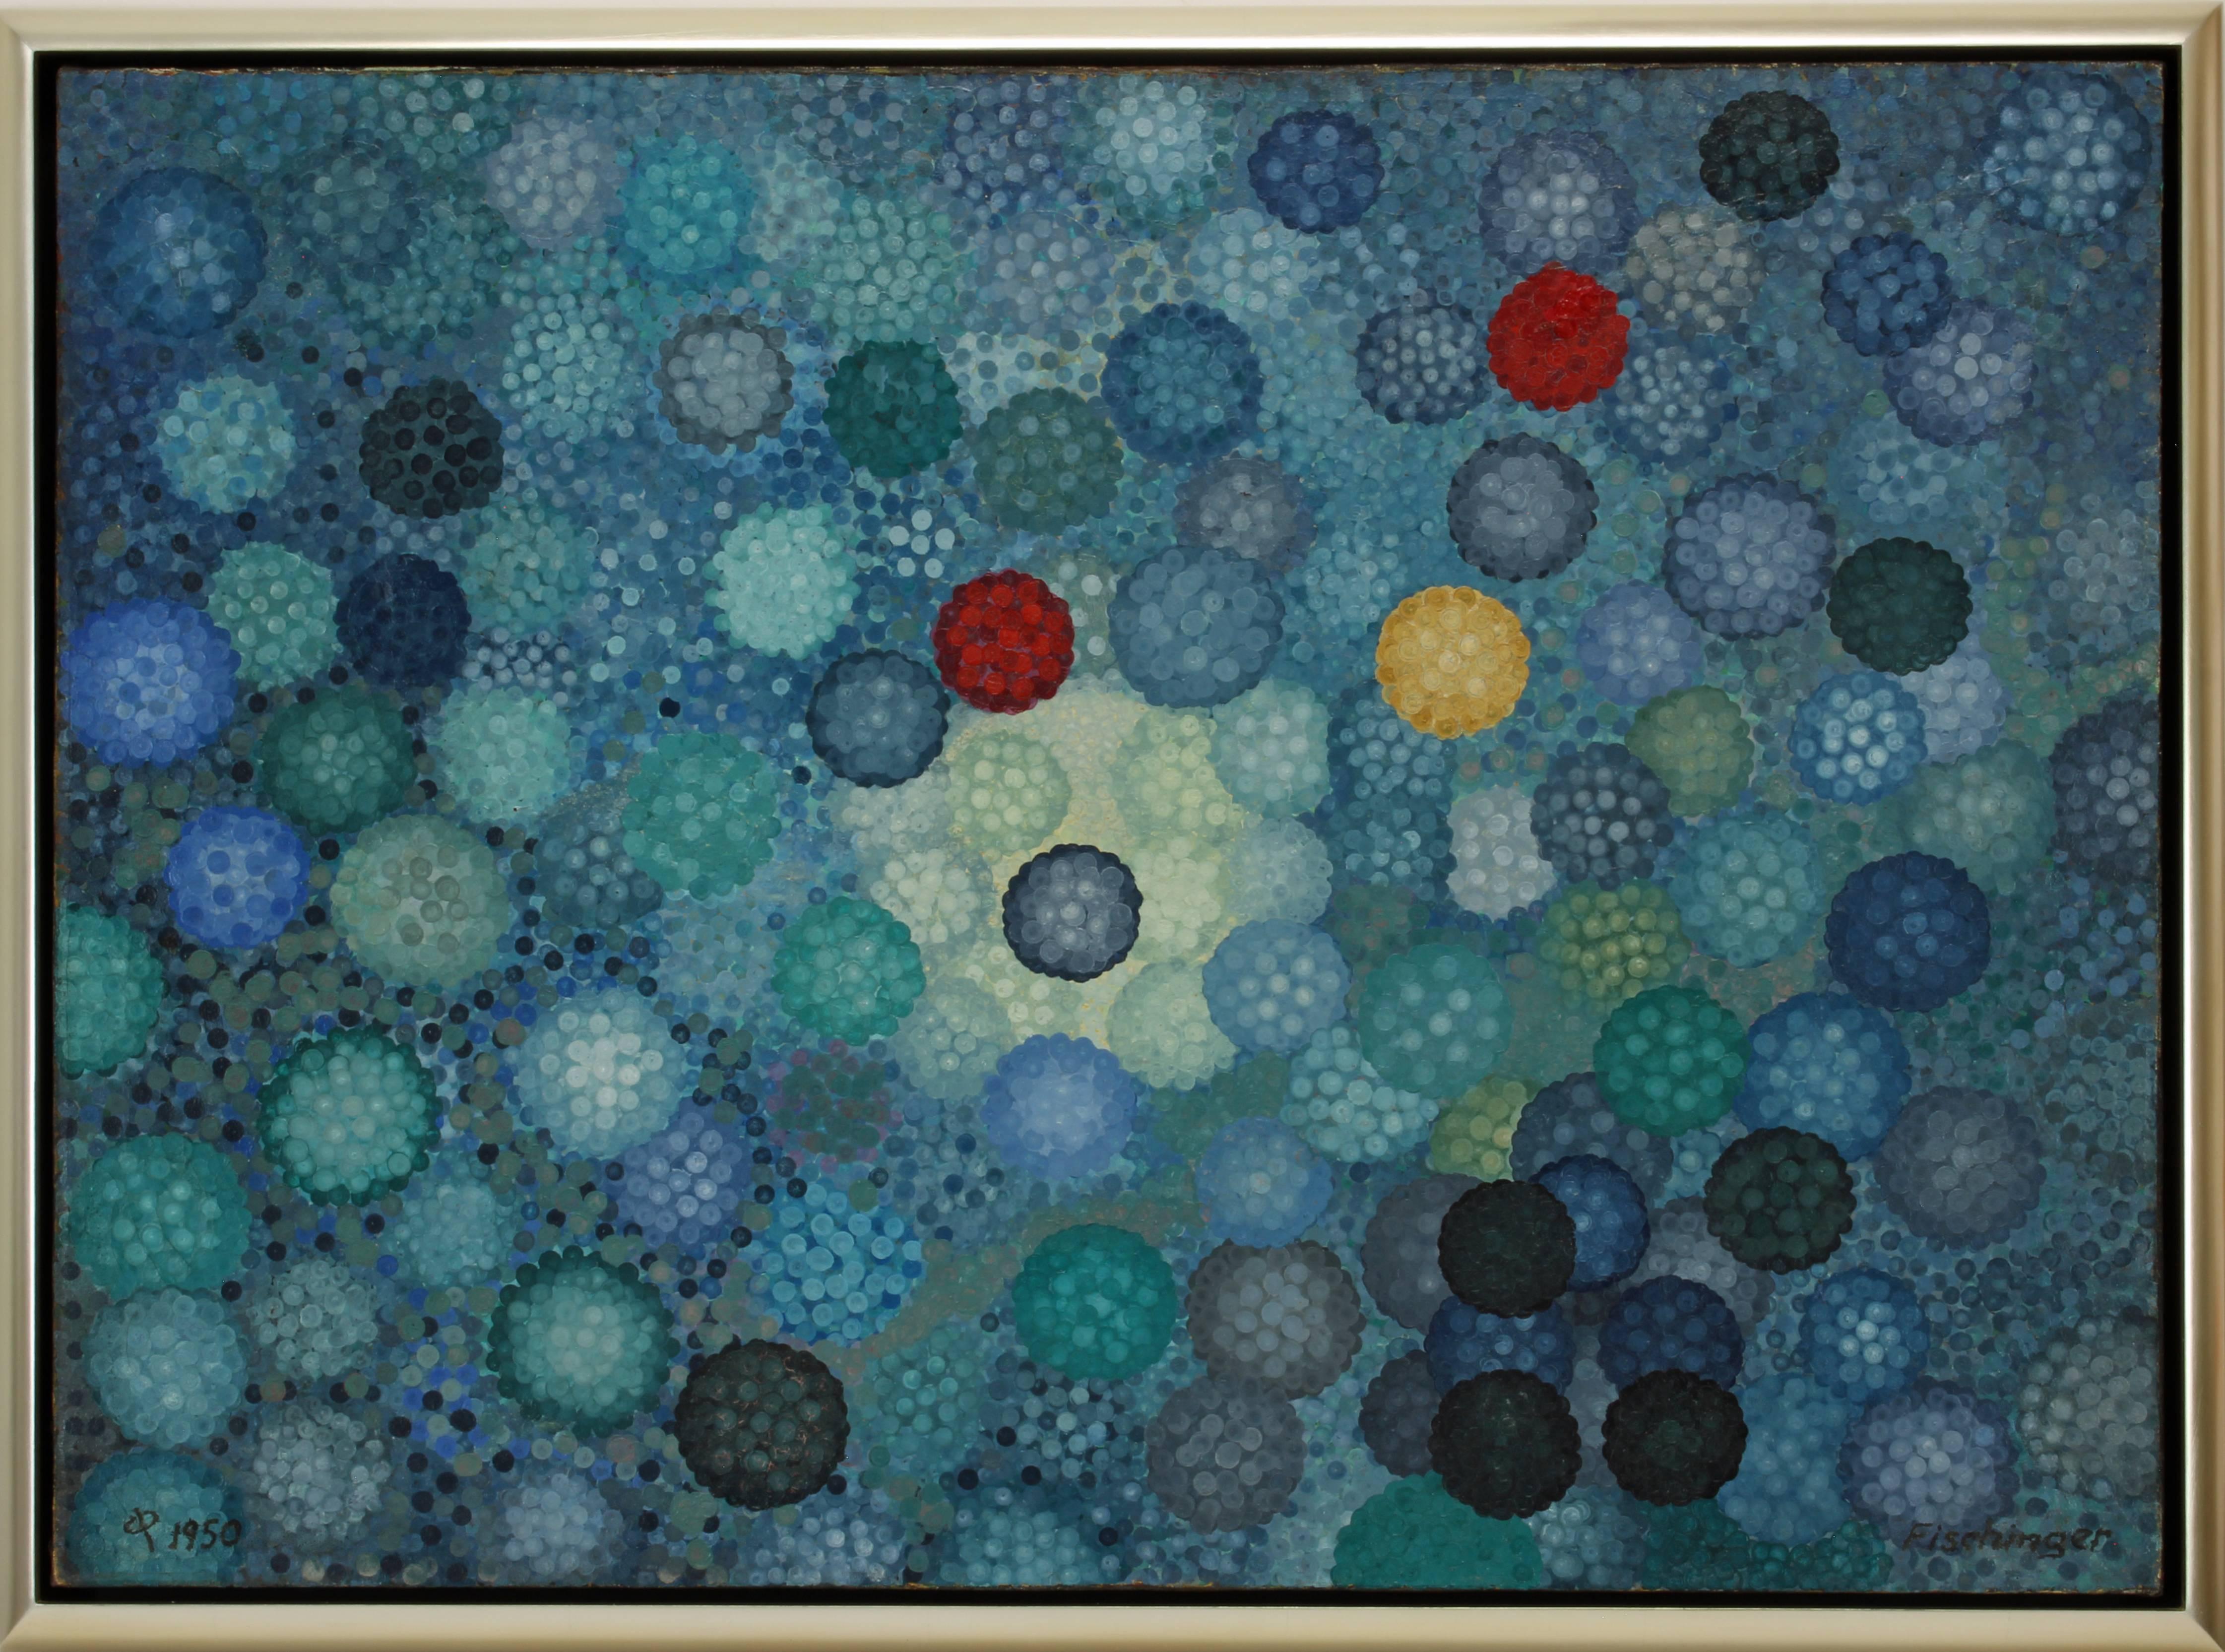 Atoms - Abstract Painting by Oskar Fischinger